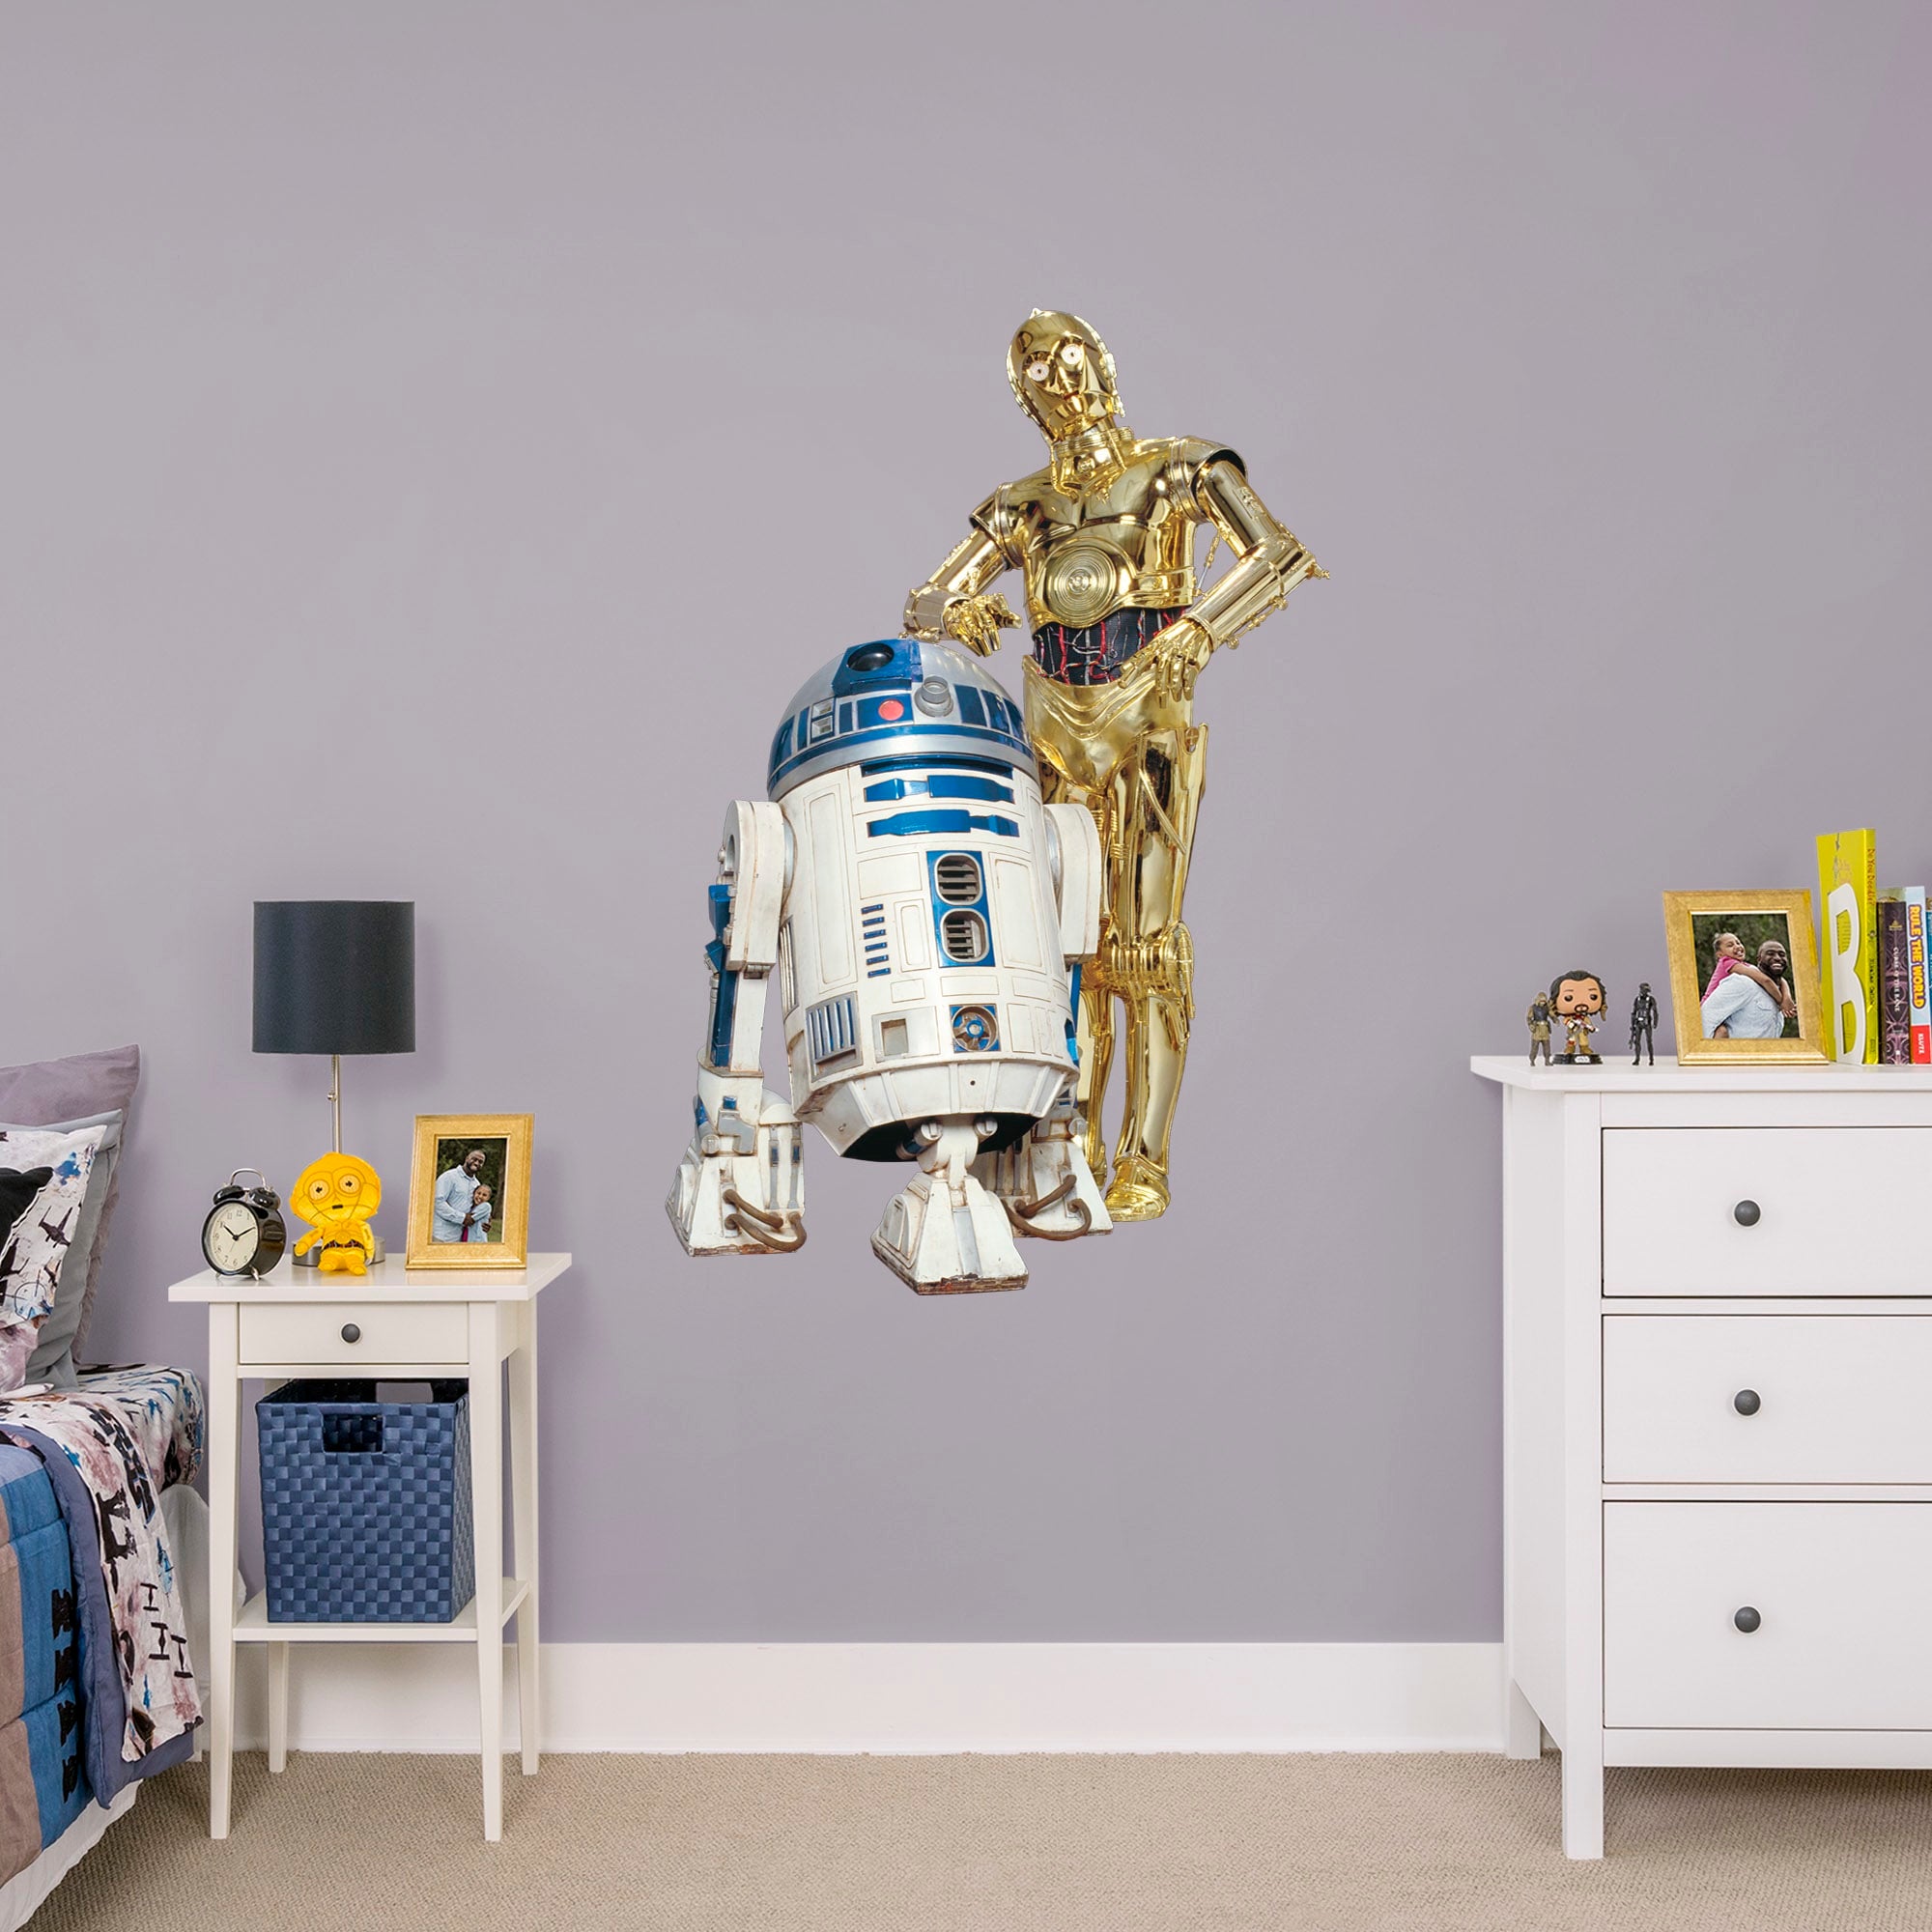 C-3PO & R2-D2 - Officially Licensed Removable Wall Decal Giant Character + 2 Decals (34"W x 51"H) by Fathead | Vinyl